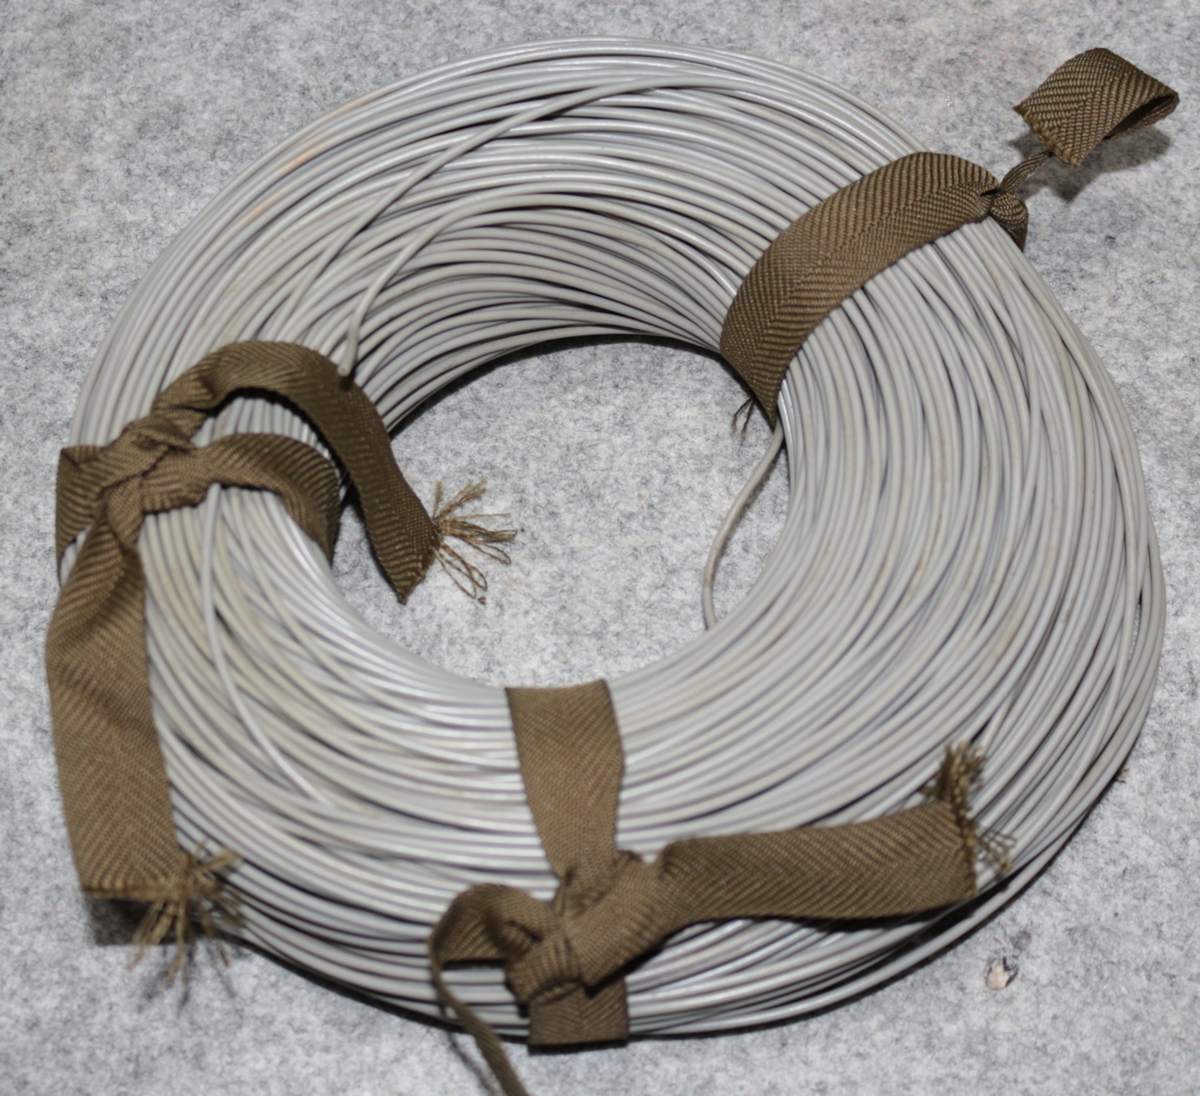  Yahoo auc 5m illusion. DDR Germany army for Vintage ash gray biniru electric wire 0.75s care AWG18 corresponding amp